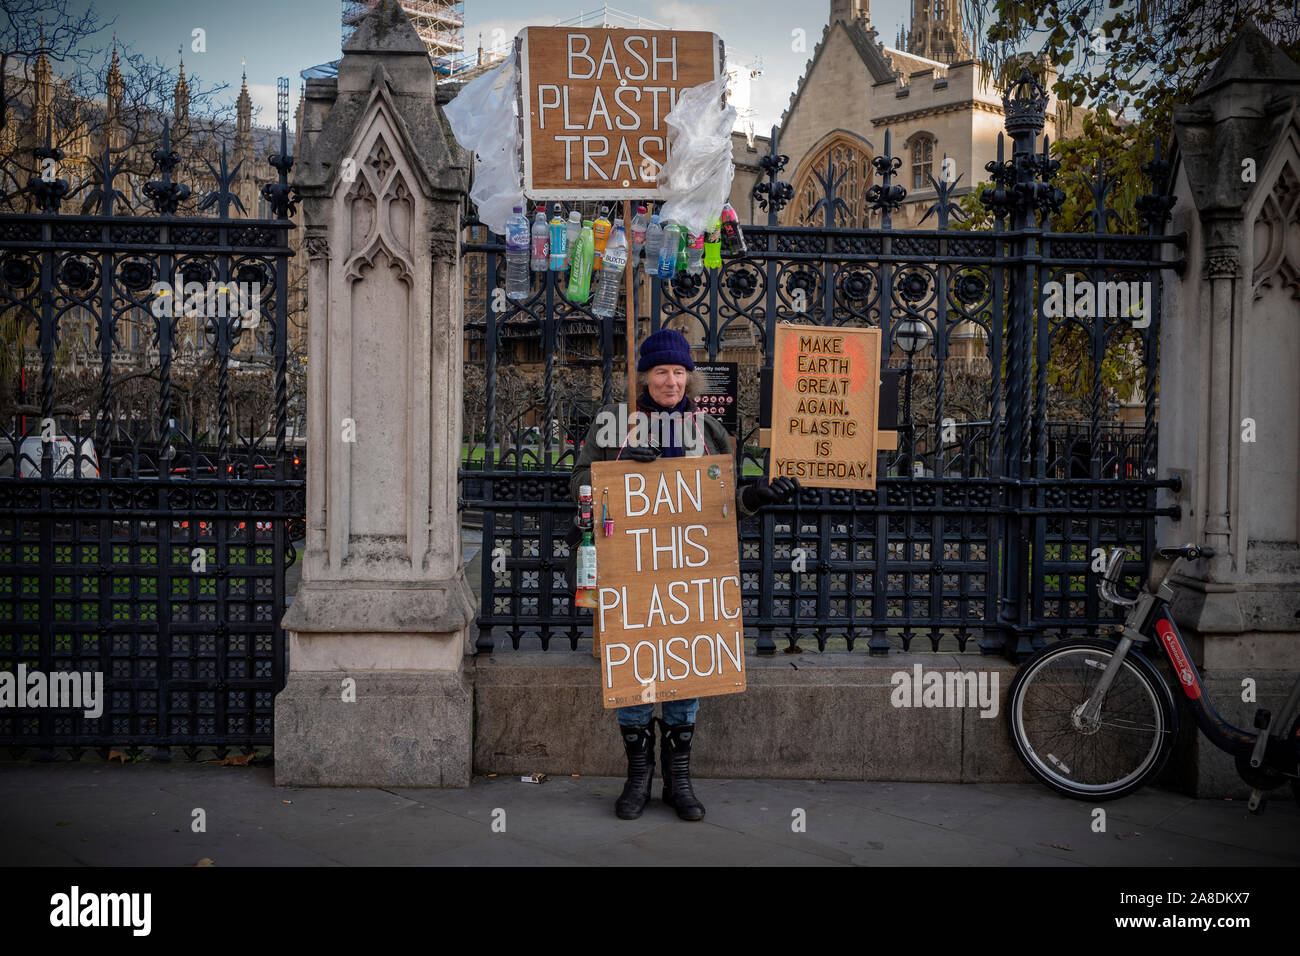 London Westminster England 8 Nov 2019 Prostest against use of Plastic outside the Houses of Parliament. Mr Robert Unbranded from east London who has been protesting against all uses of Plastic since Feb 2019 out side the Houses of Parliament in Westminster London UK. Credit: BRIAN HARRIS/Alamy Live News Stock Photo